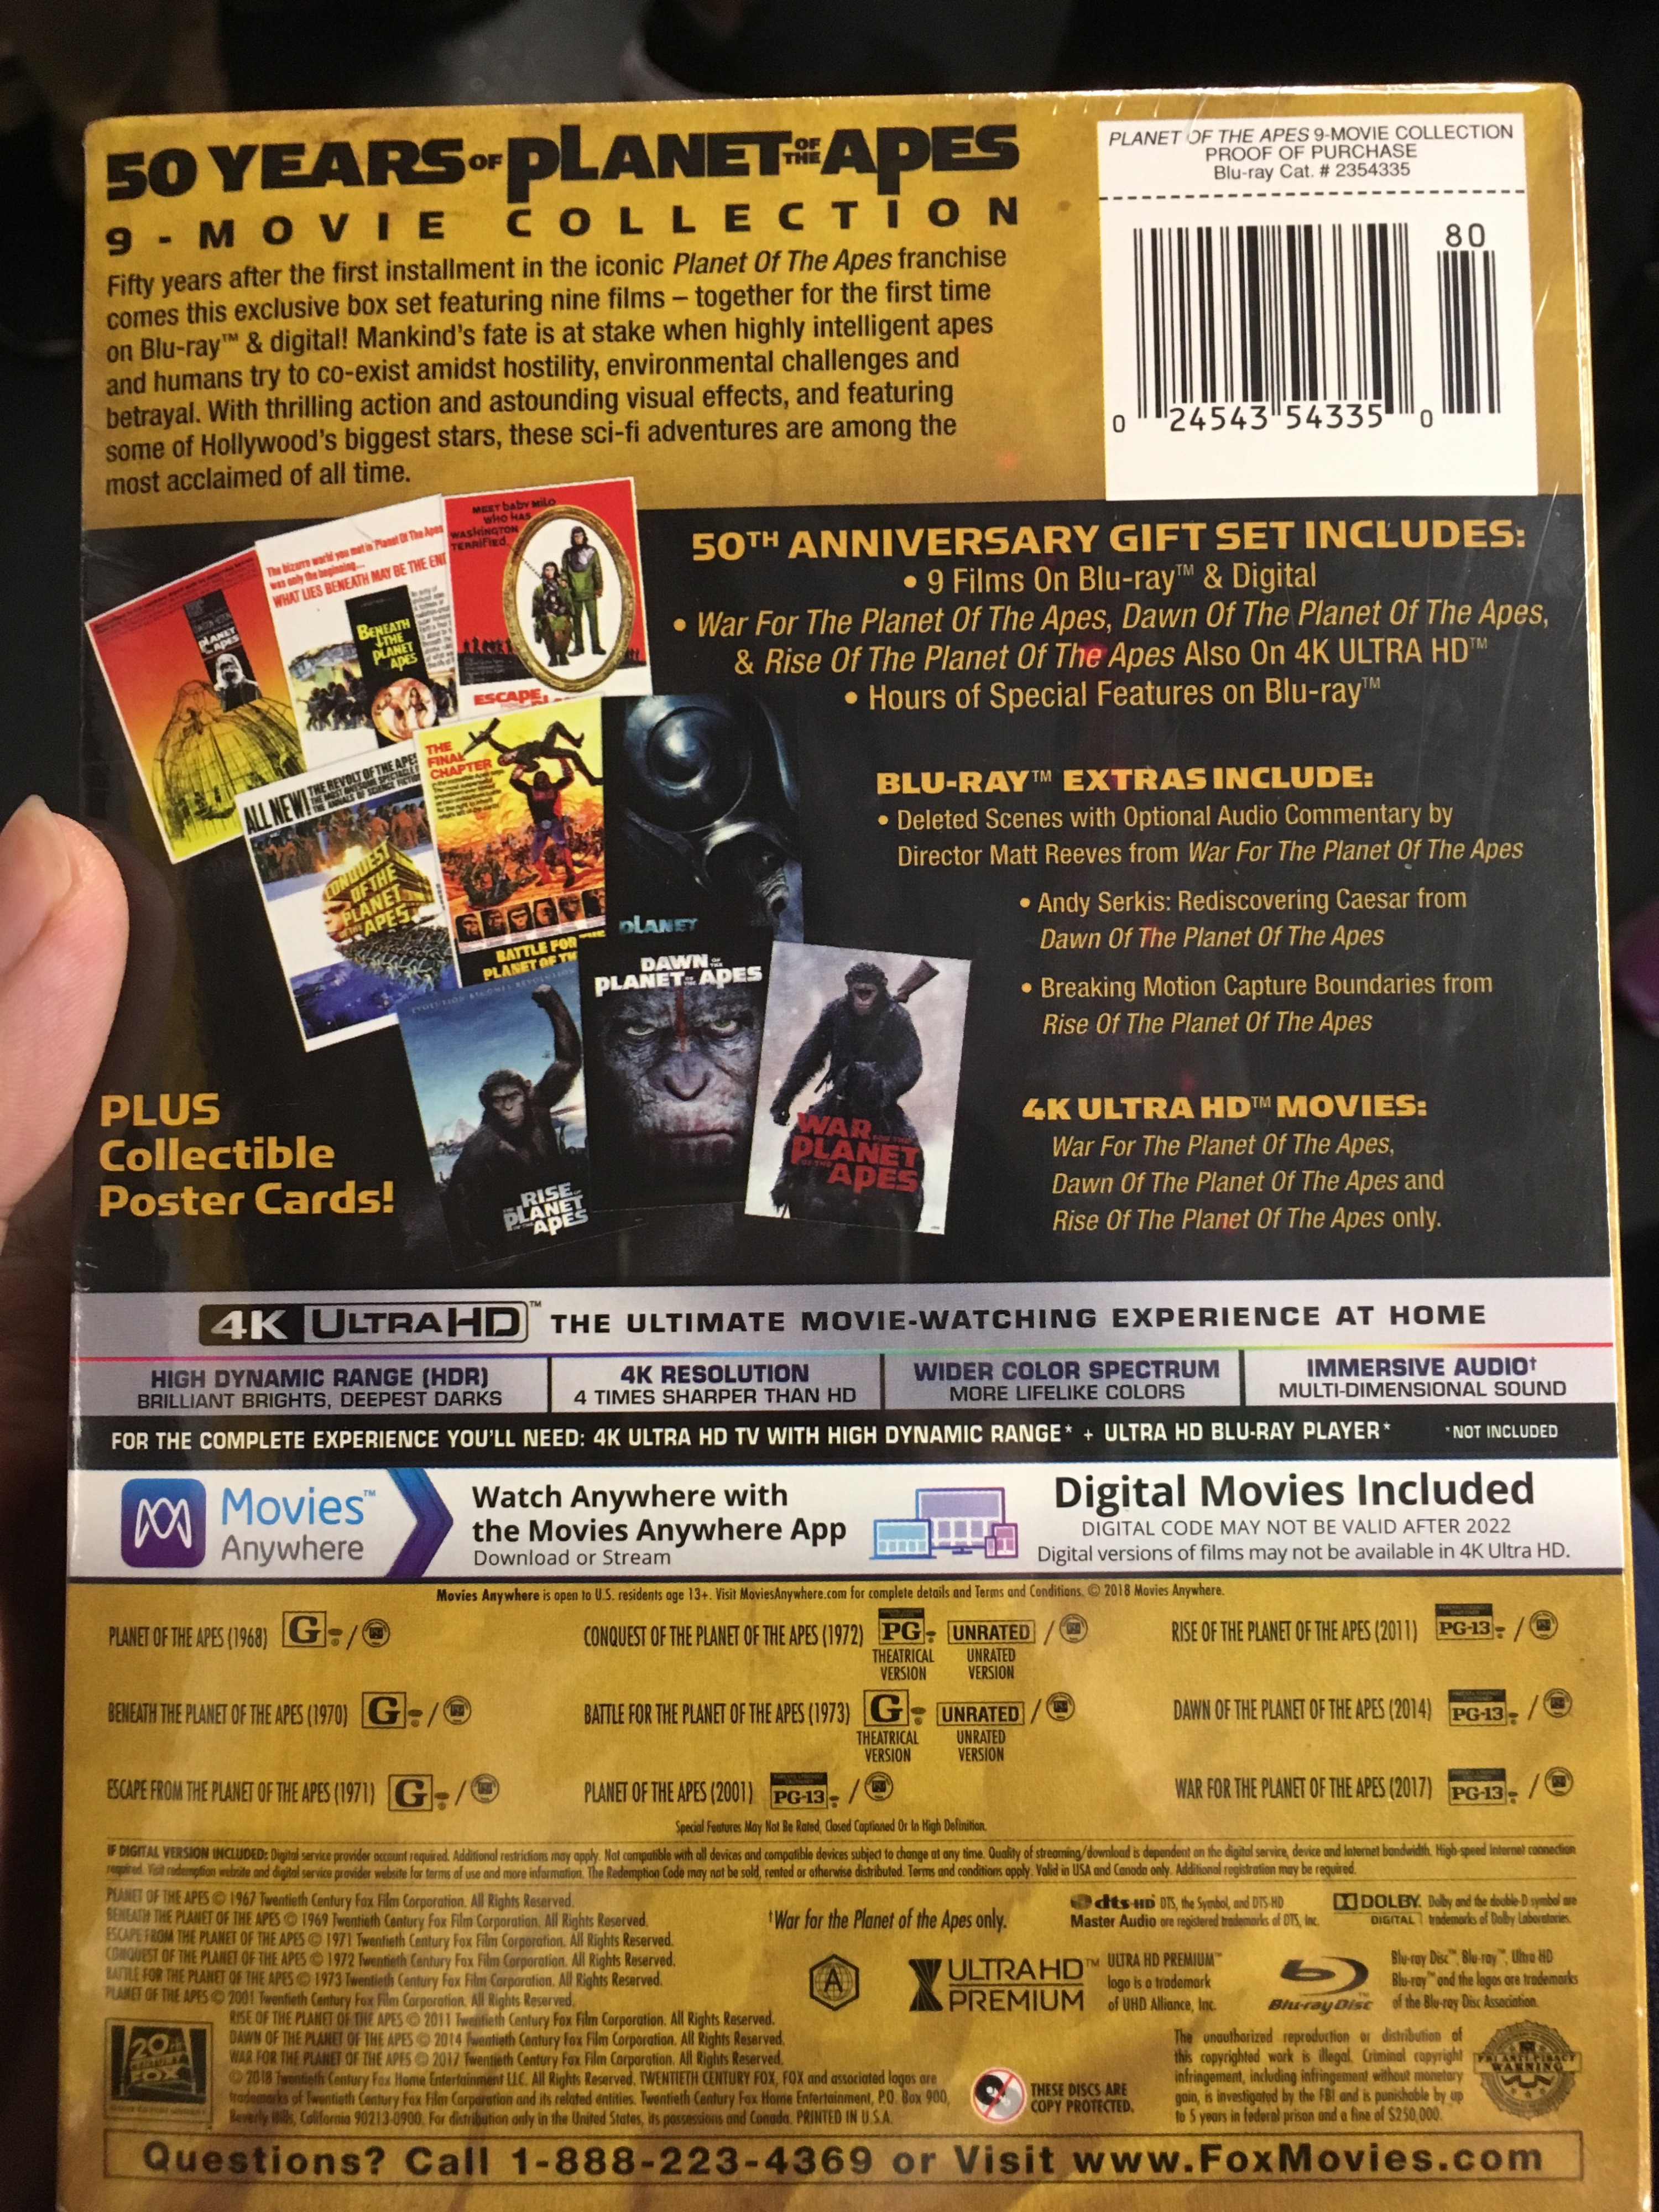 12 Disc - 50 Years of Planet of the Apes - Collection - DVD Talk Forum